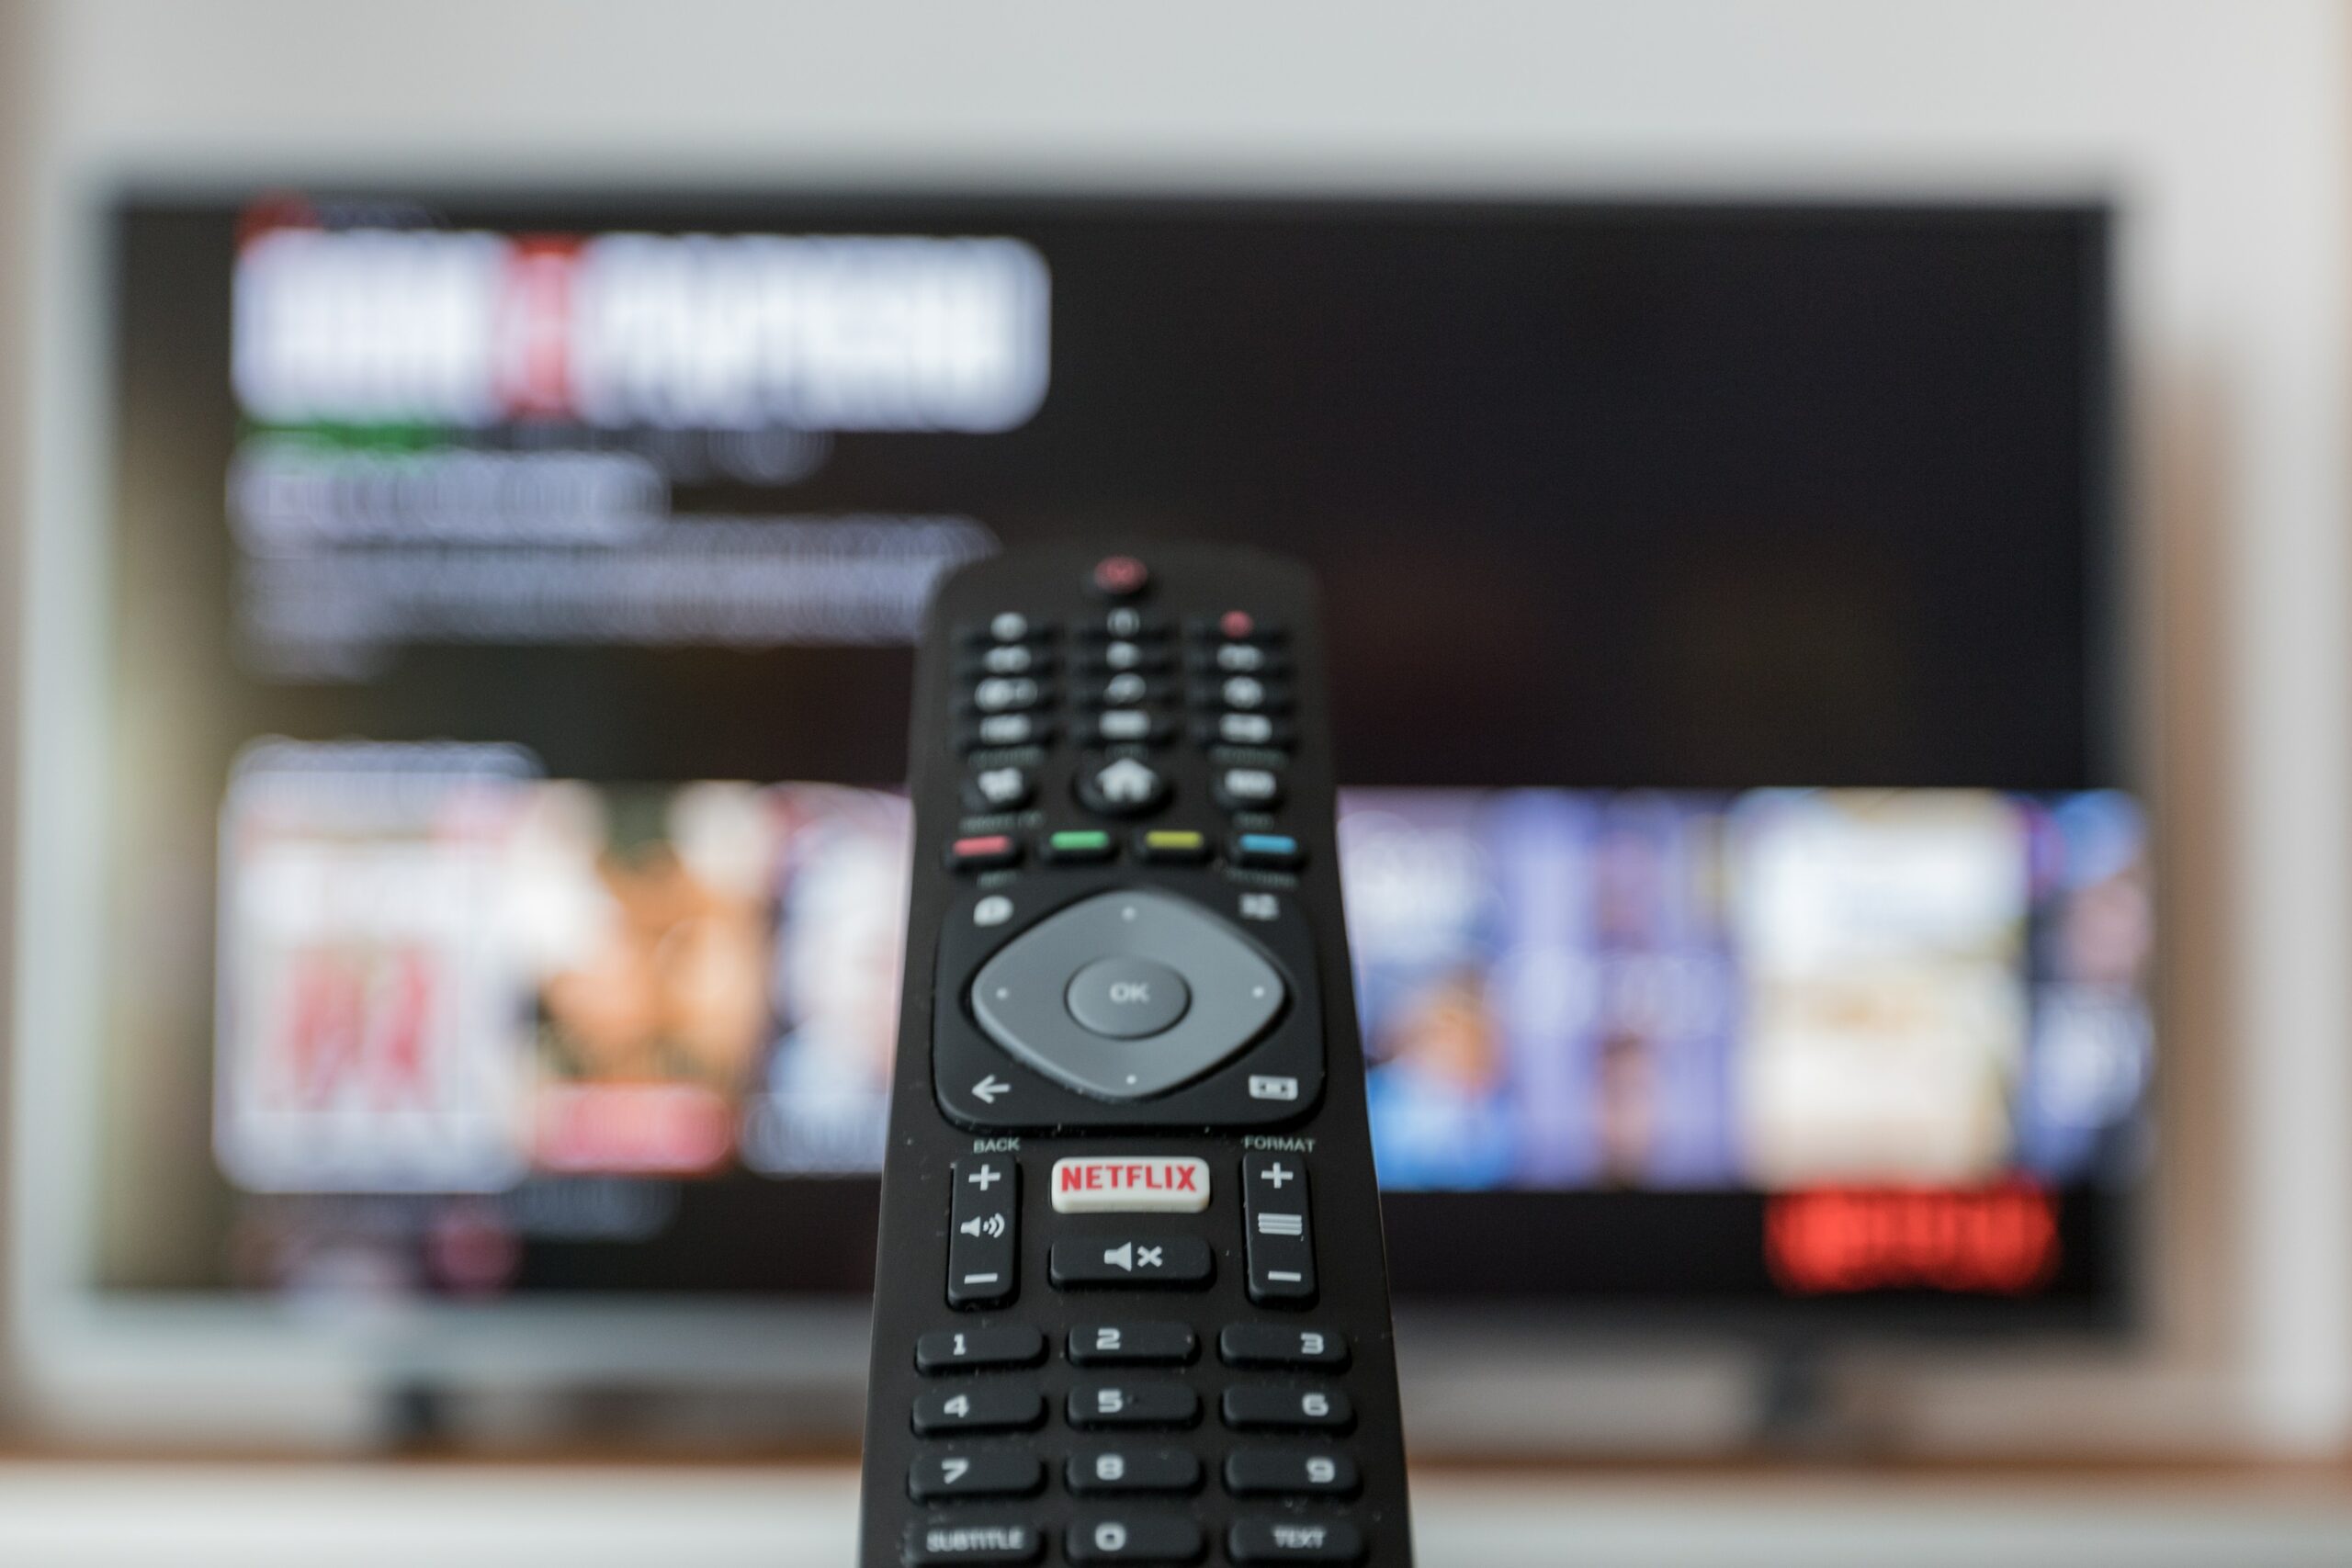 How to clean the tv screen and remote controls like a pro